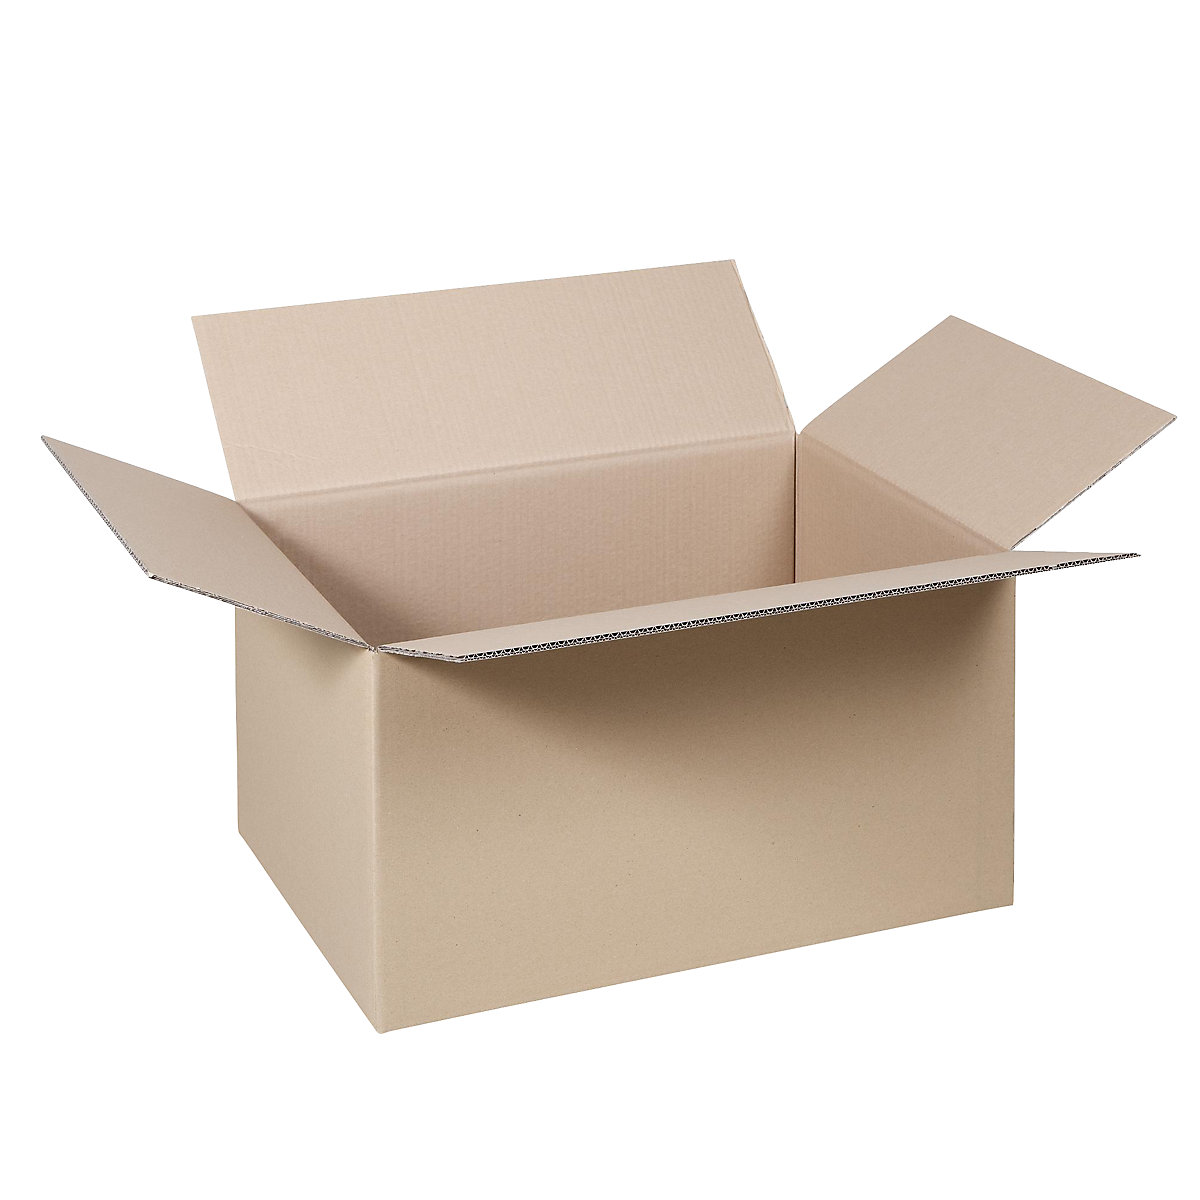 Folding cardboard box, FEFCO 0201, made of double fluted cardboard, internal dimensions 600 x 400 x 300 mm, pack of 100-26